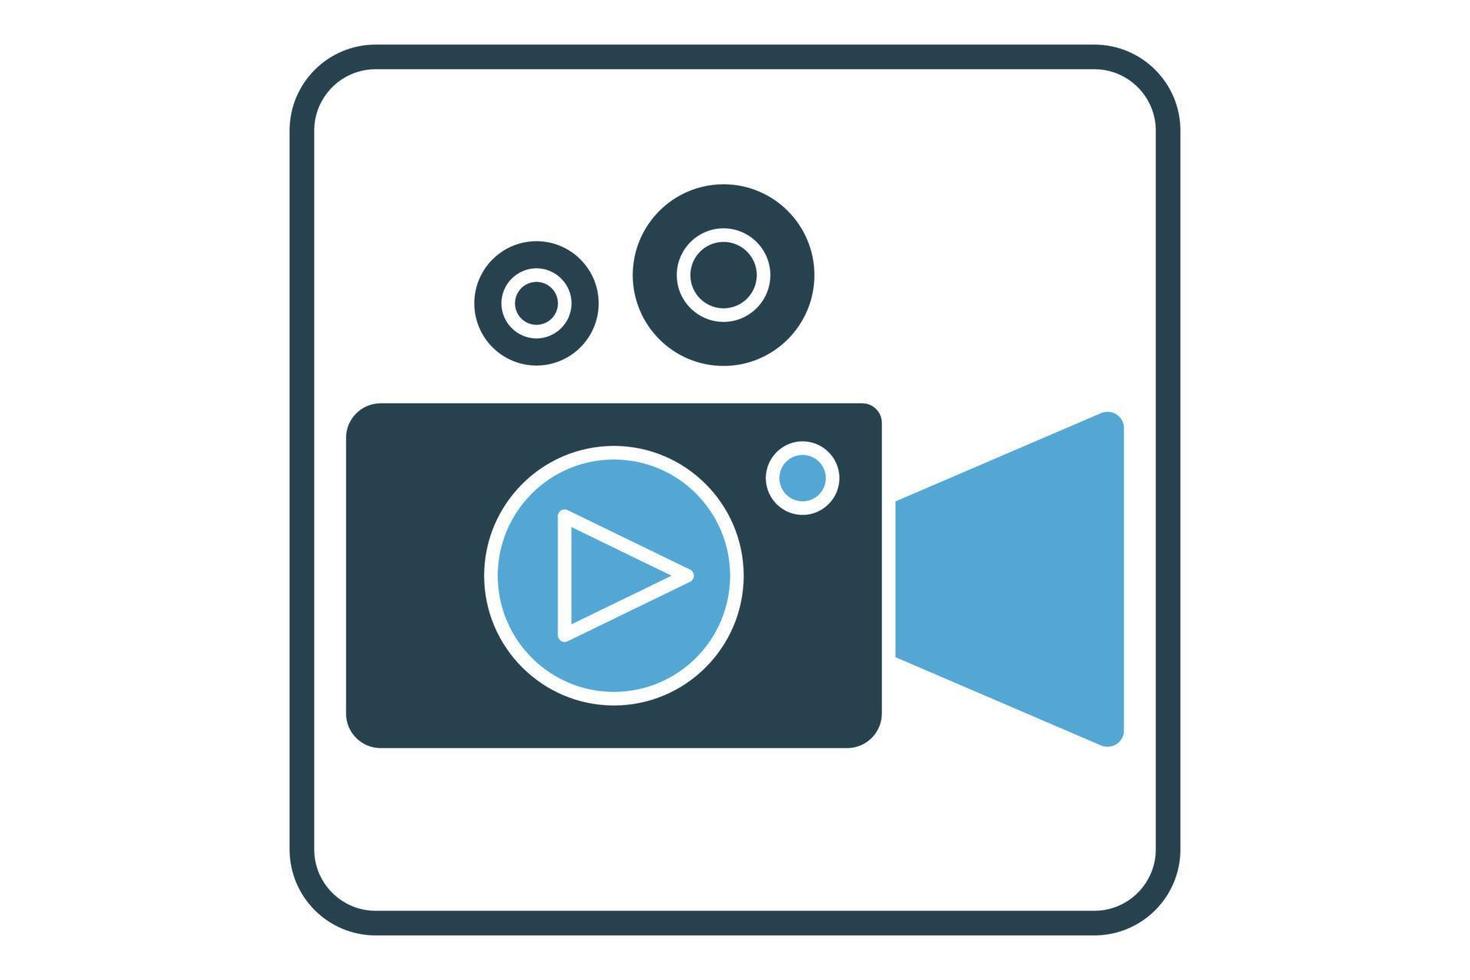 Play camera video icon illustration. icon related to multimedia. Solid icon style. Simple vector design editable